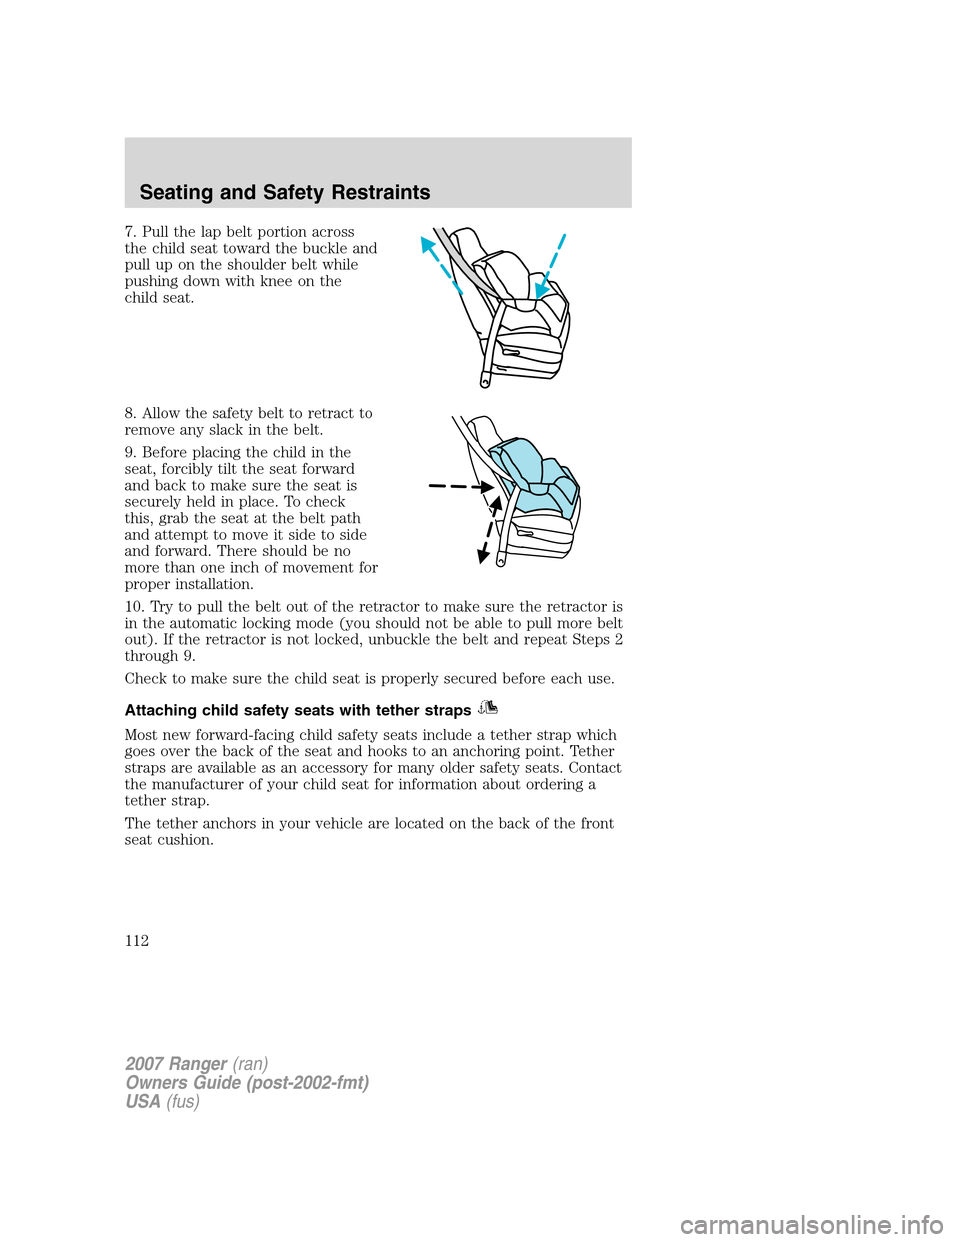 FORD RANGER 2007 2.G User Guide 7. Pull the lap belt portion across
the child seat toward the buckle and
pull up on the shoulder belt while
pushing down with knee on the
child seat.
8. Allow the safety belt to retract to
remove any 